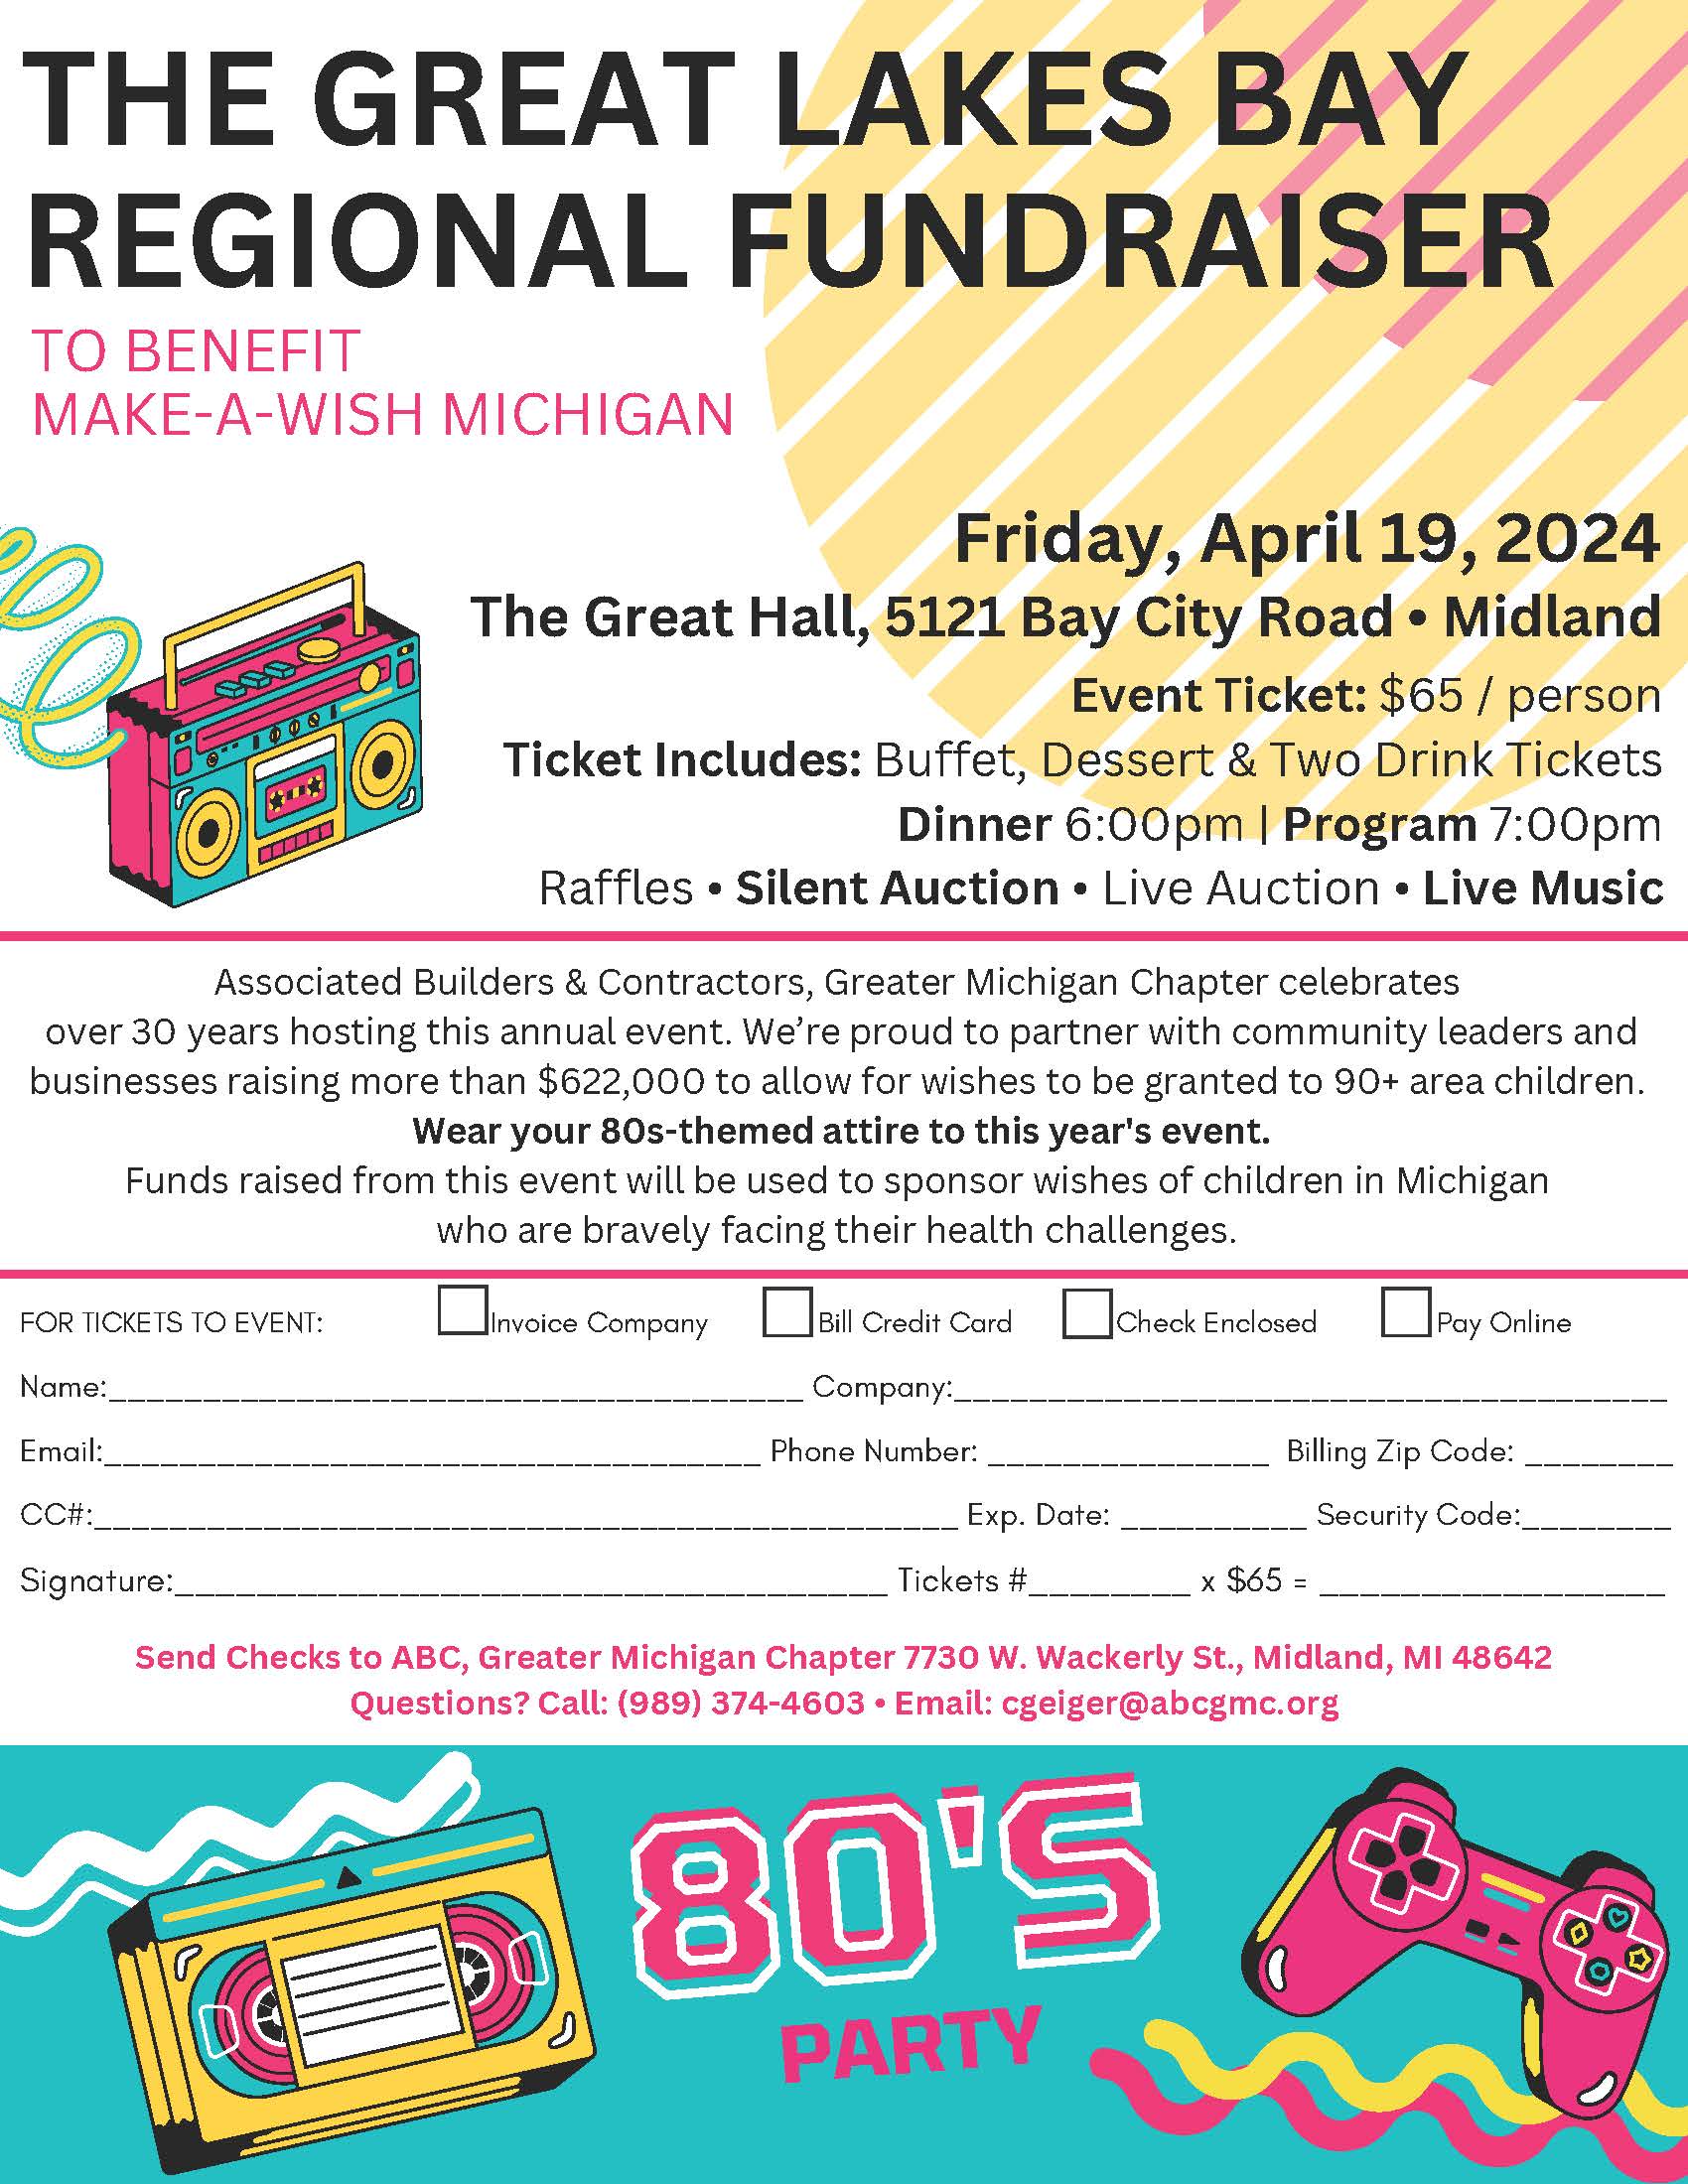 The Great Lakes Bay Regional Fundraiser